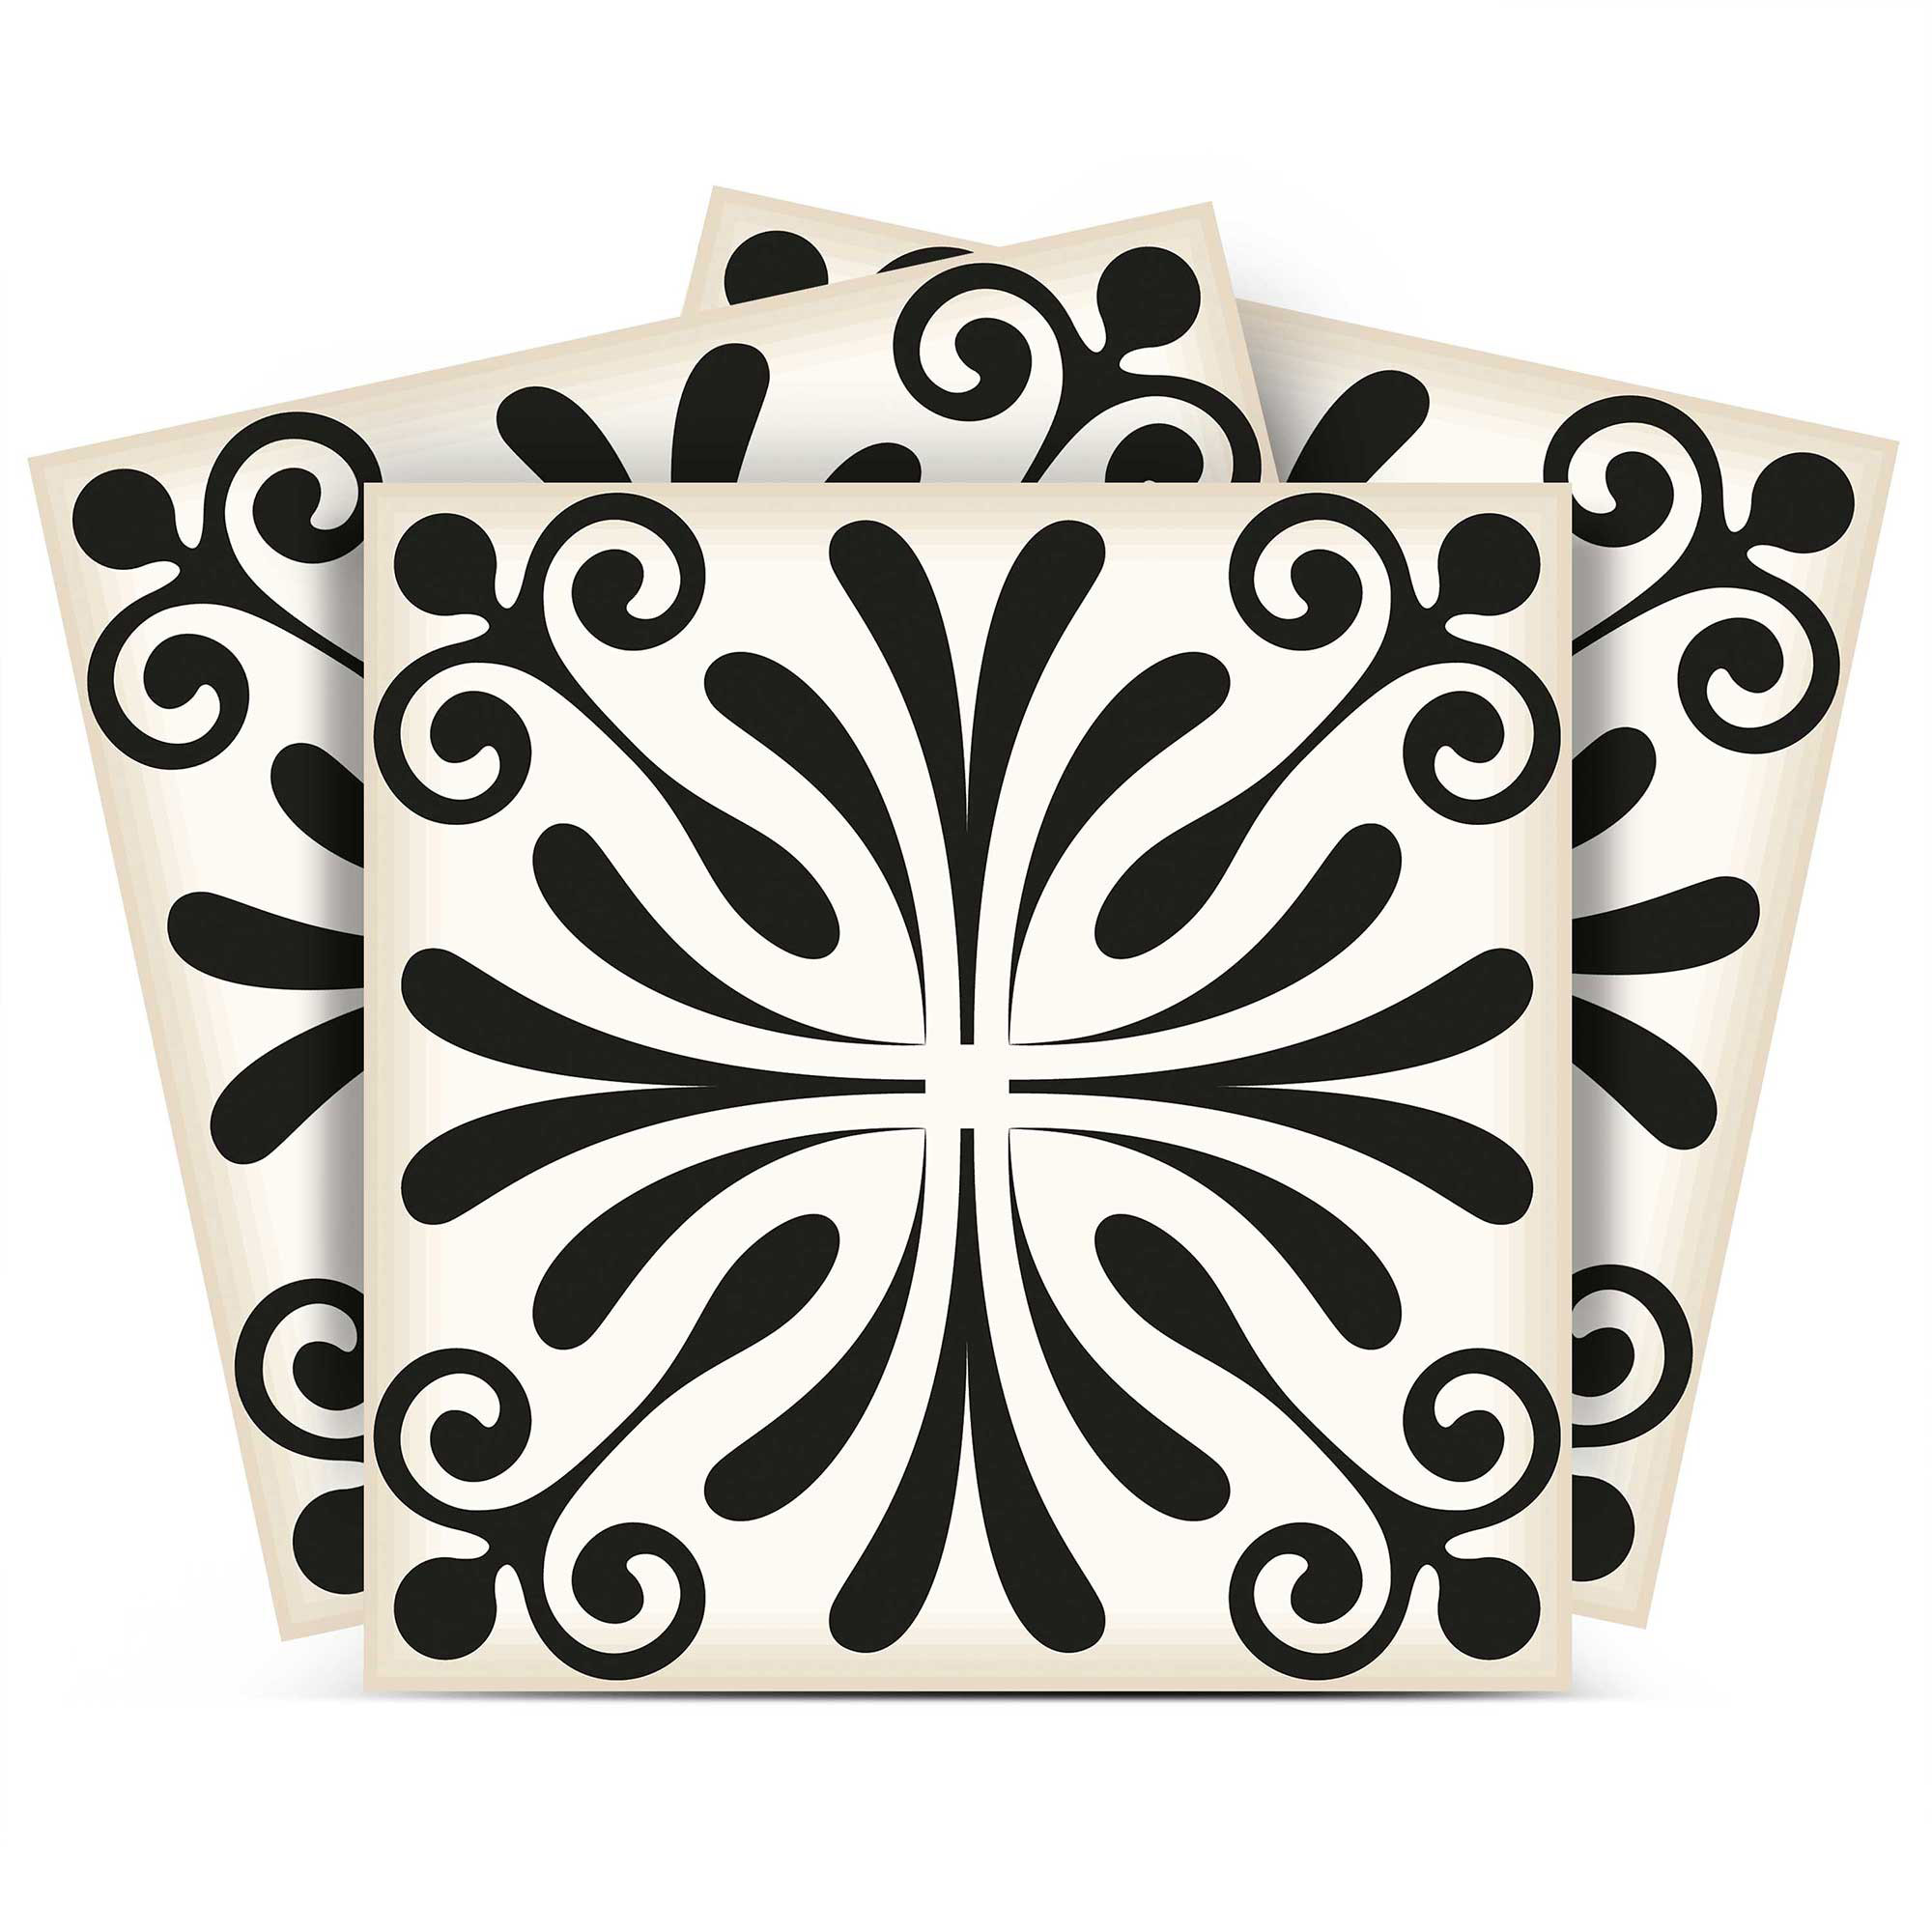 6" X 6" Black and White Flo Peel and Stick Removable Tiles-399952-1